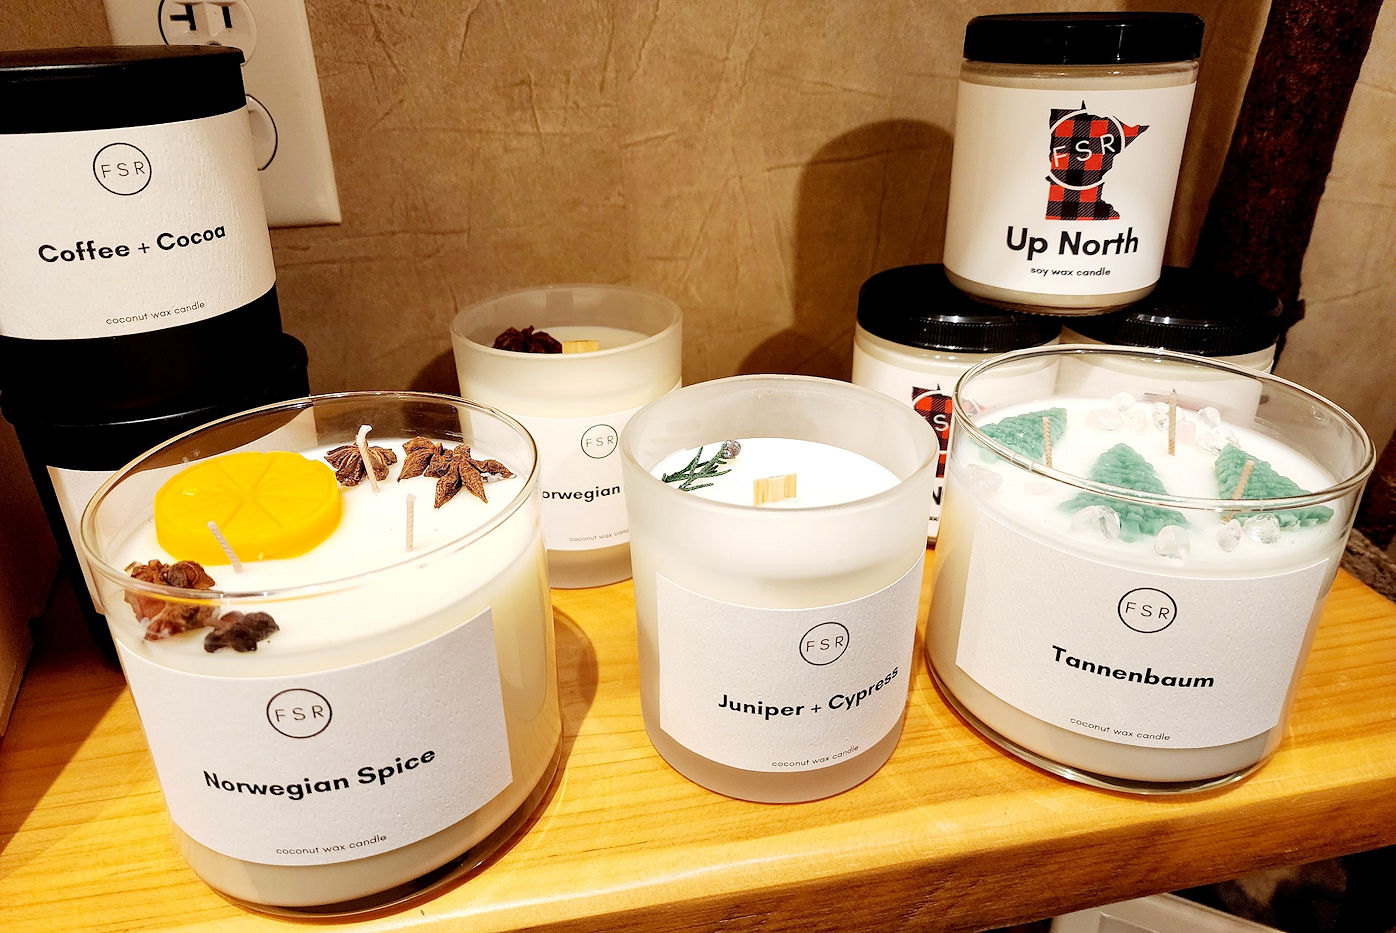 FSR Holiday Candles have arrived at The Spa Within!